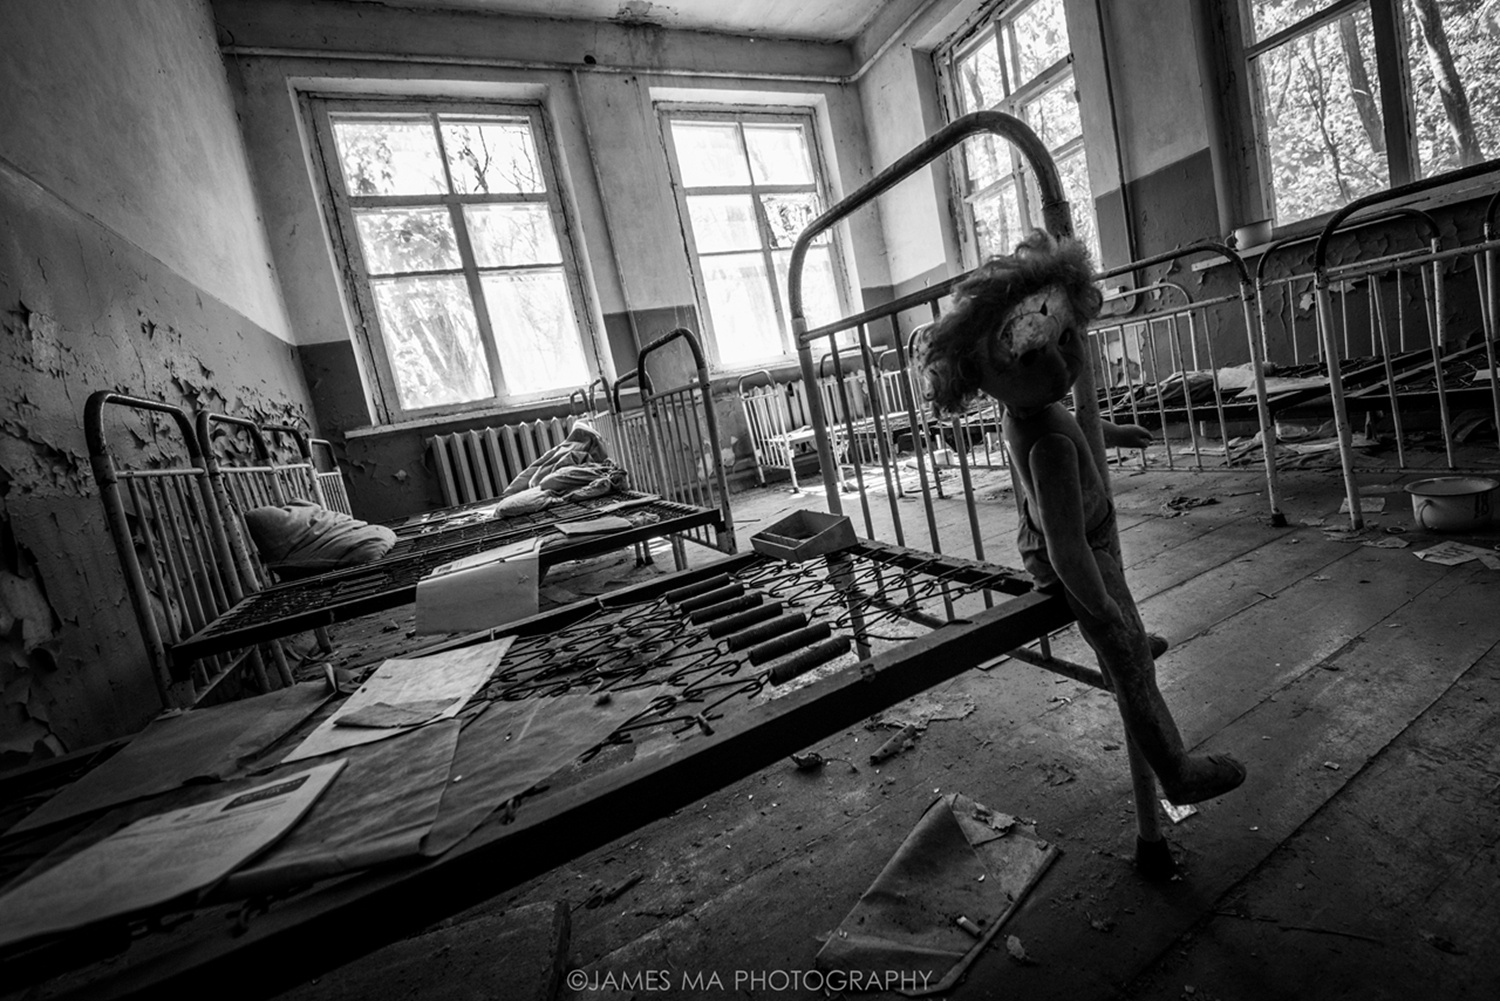 6 questions about the Chernobyl catastrophe - Russia Beyond